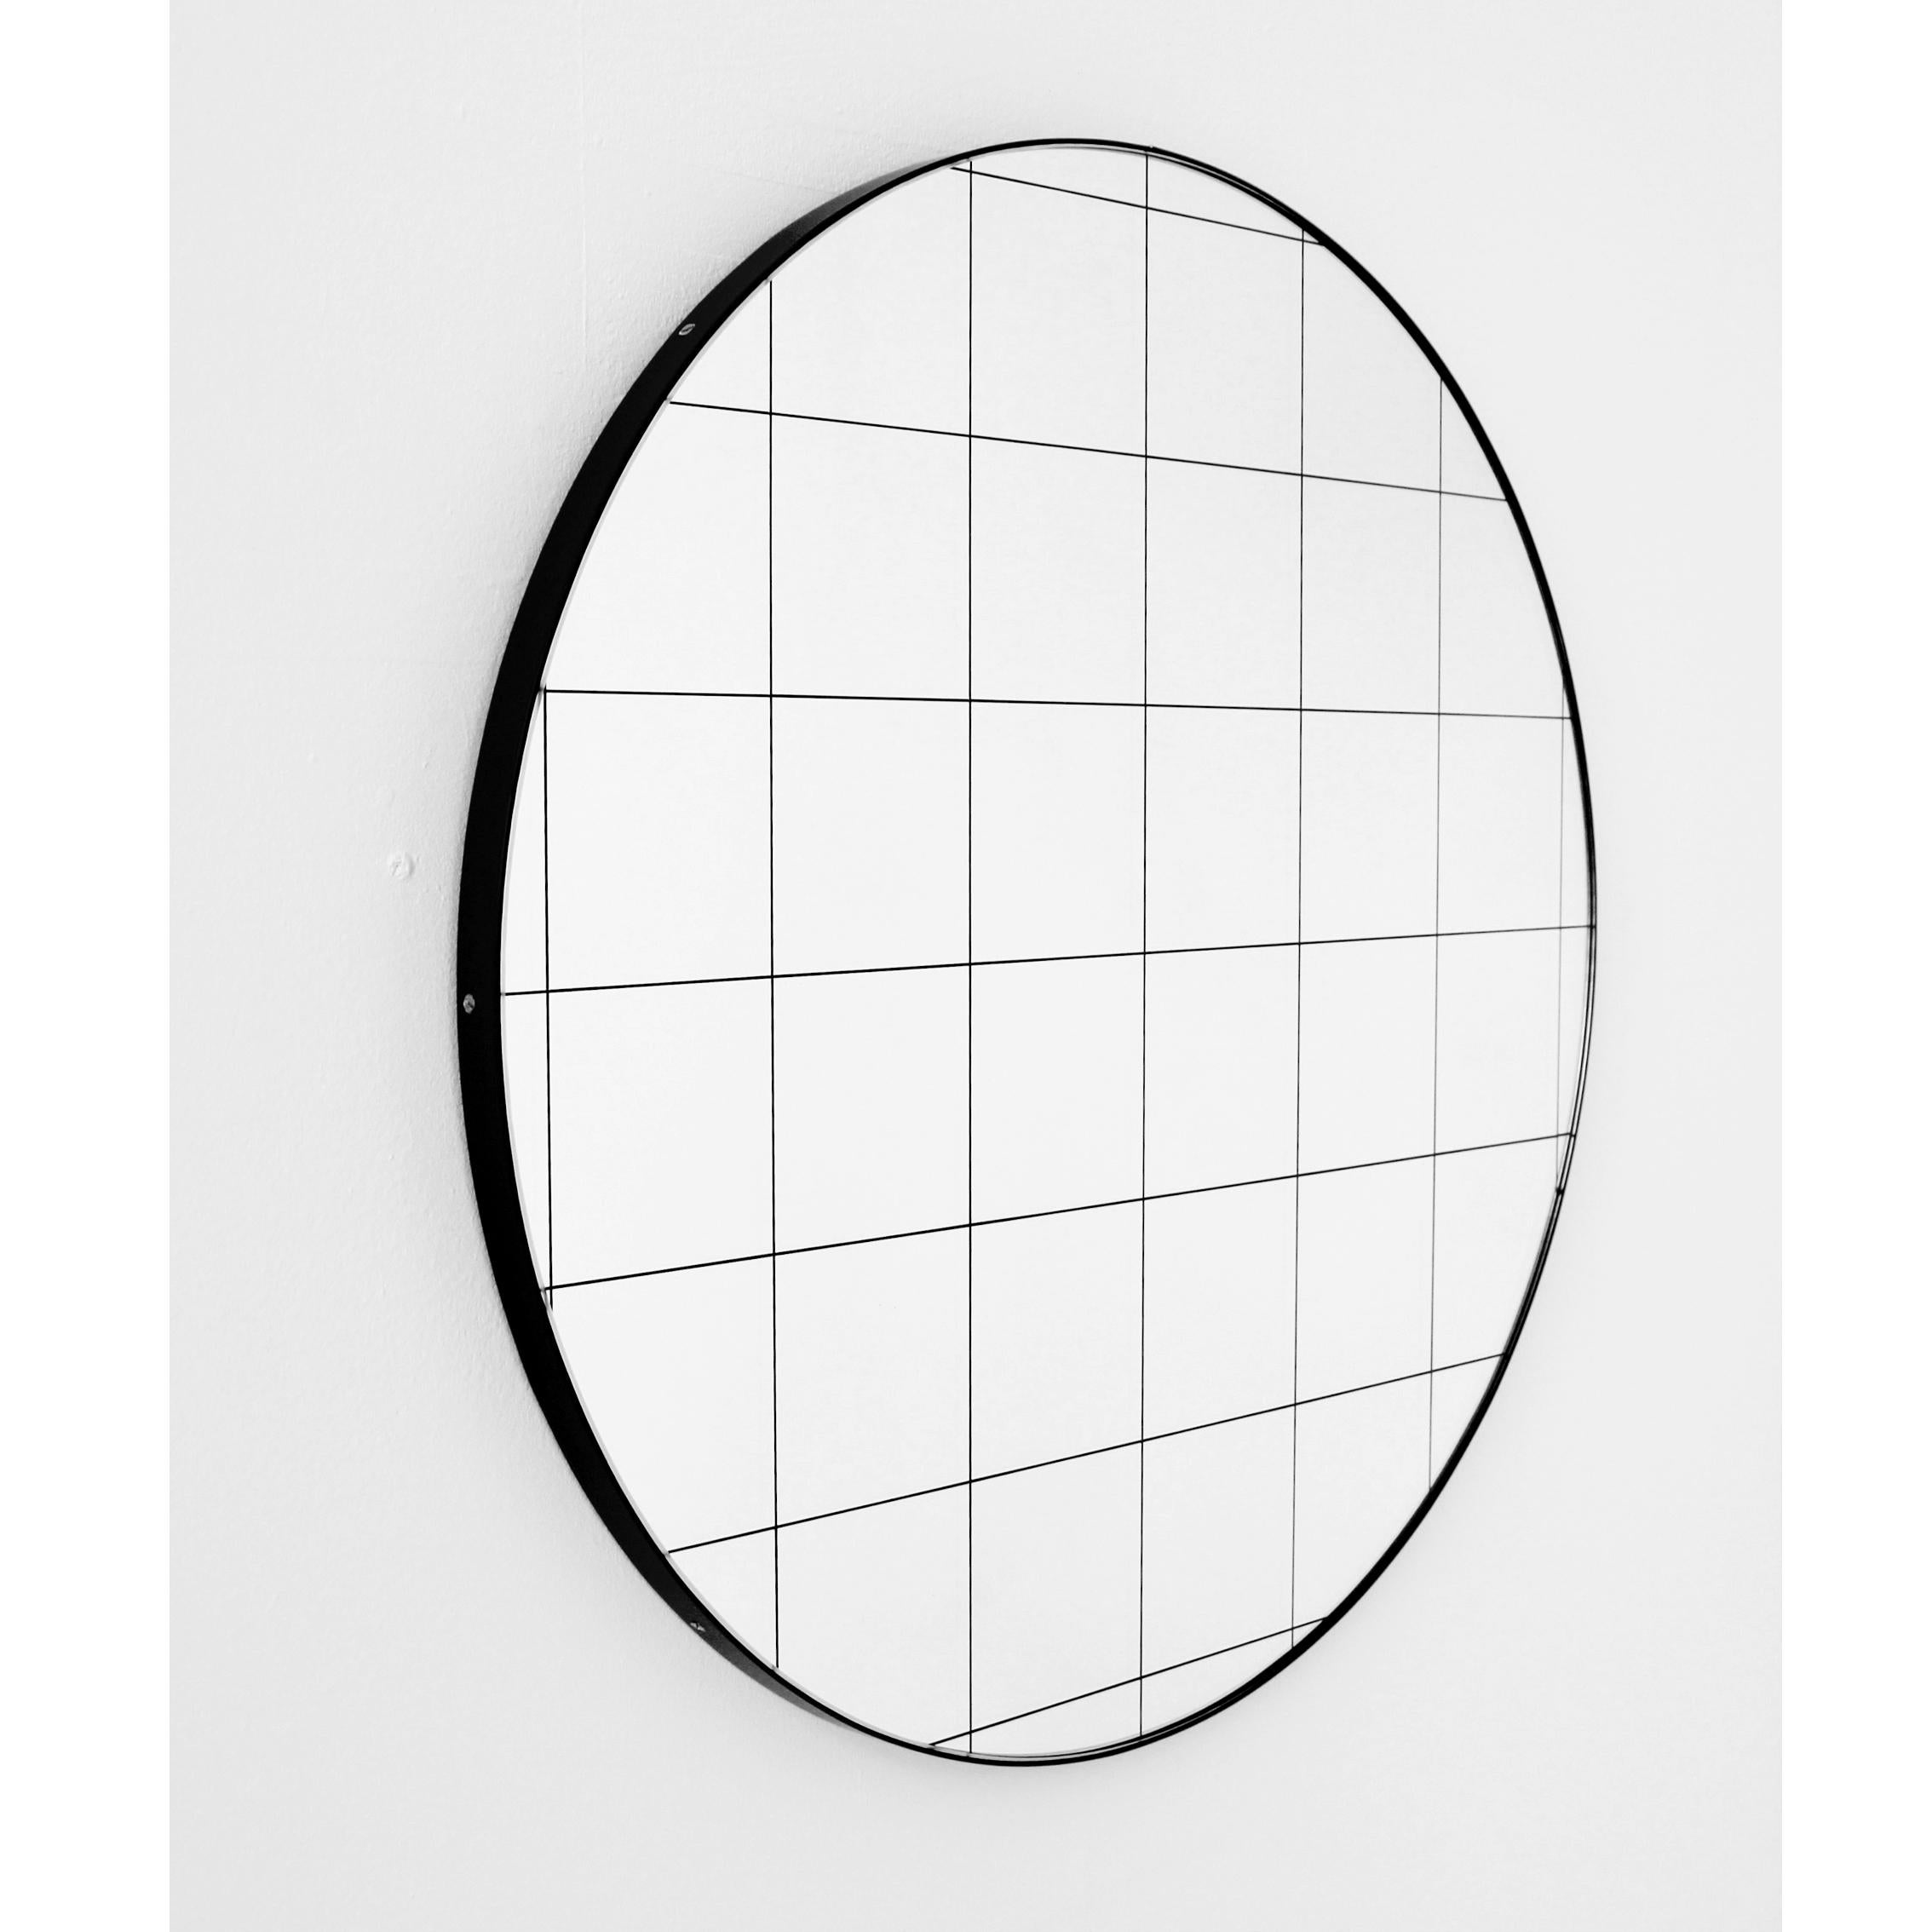 Modern decorative round mirror with a black grid and an aluminium powder coated black frame. Designed and handcrafted in London, UK.

Medium, large and extra-large mirrors (60, 80 and 100cm) are fitted with an ingenious French cleat (split batten)